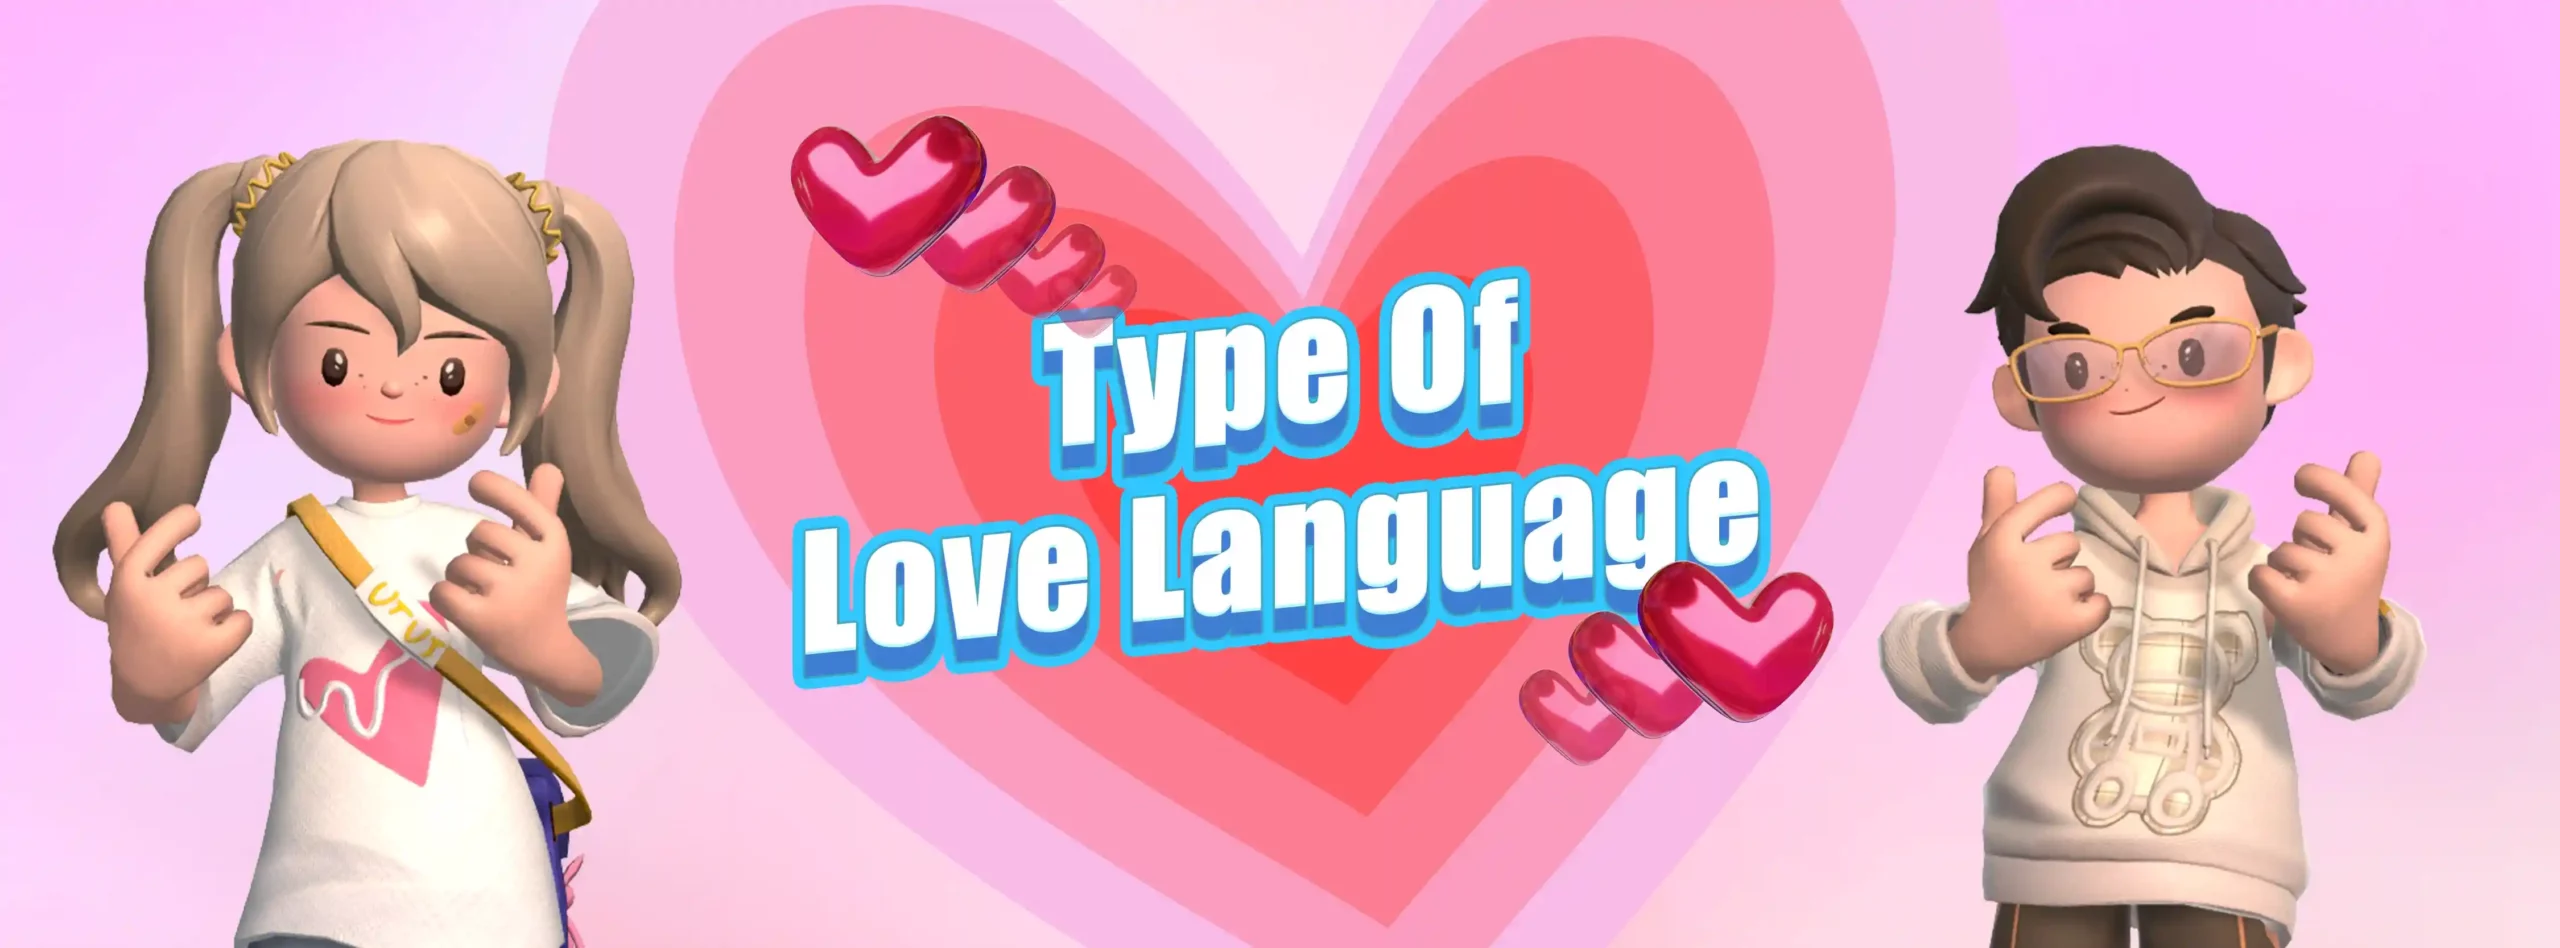 5-types-of-love-language-and-how-to-know-it-in-a-relationship-jagat-blog